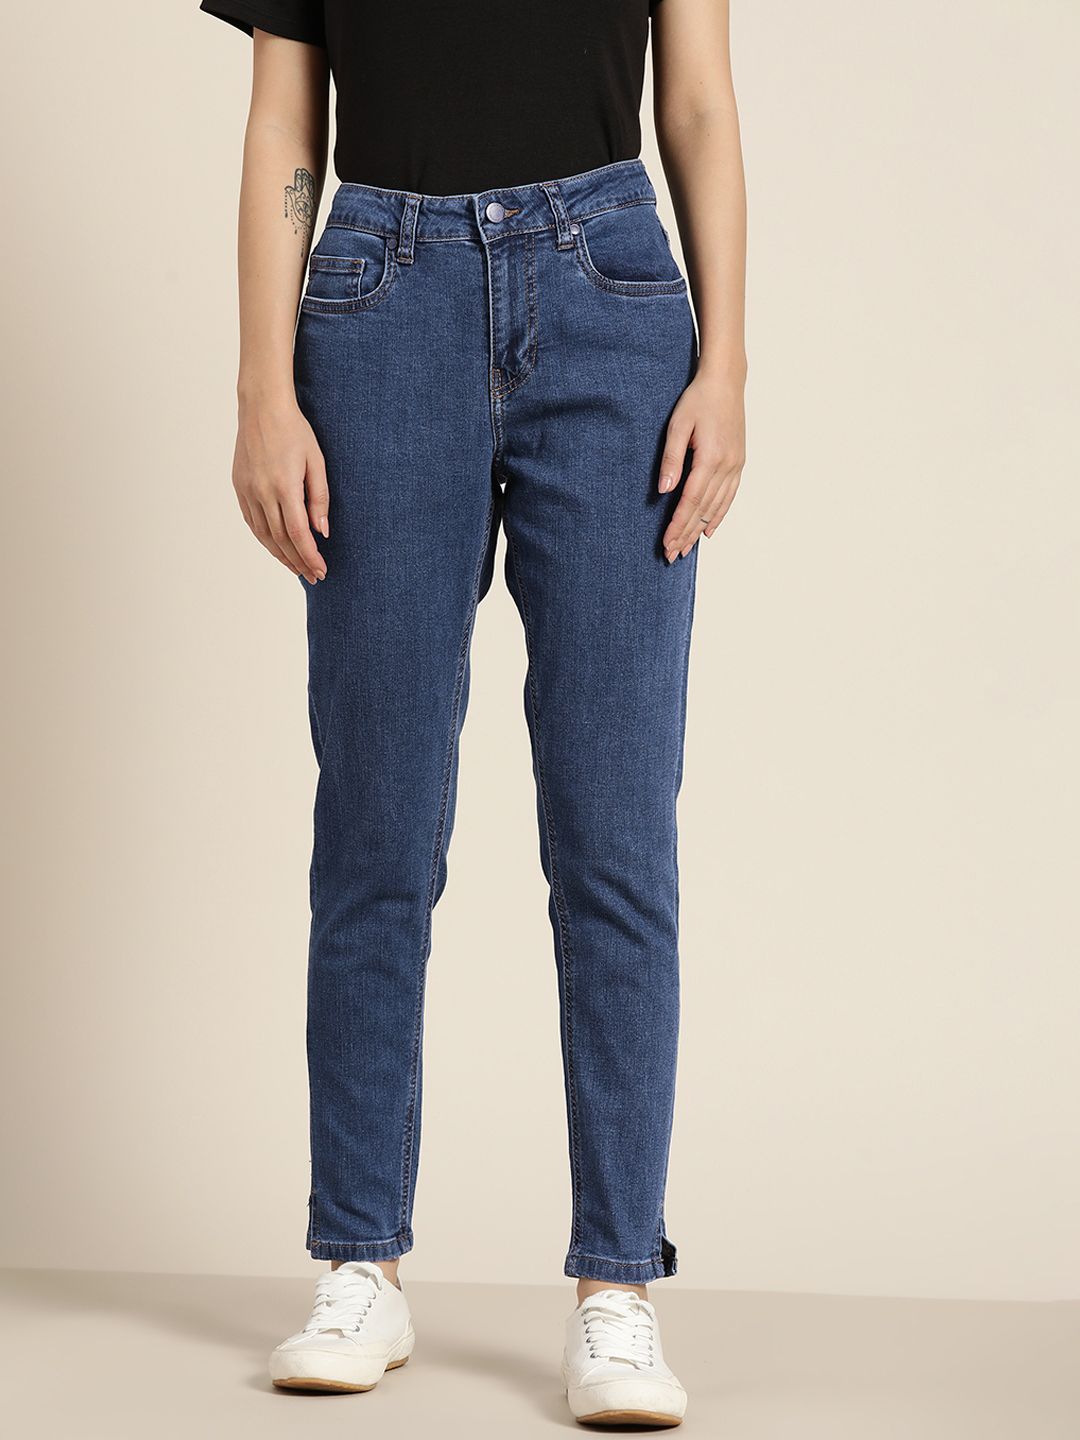 ether Women Blue Skinny Fit Stretchable Jeans Price in India